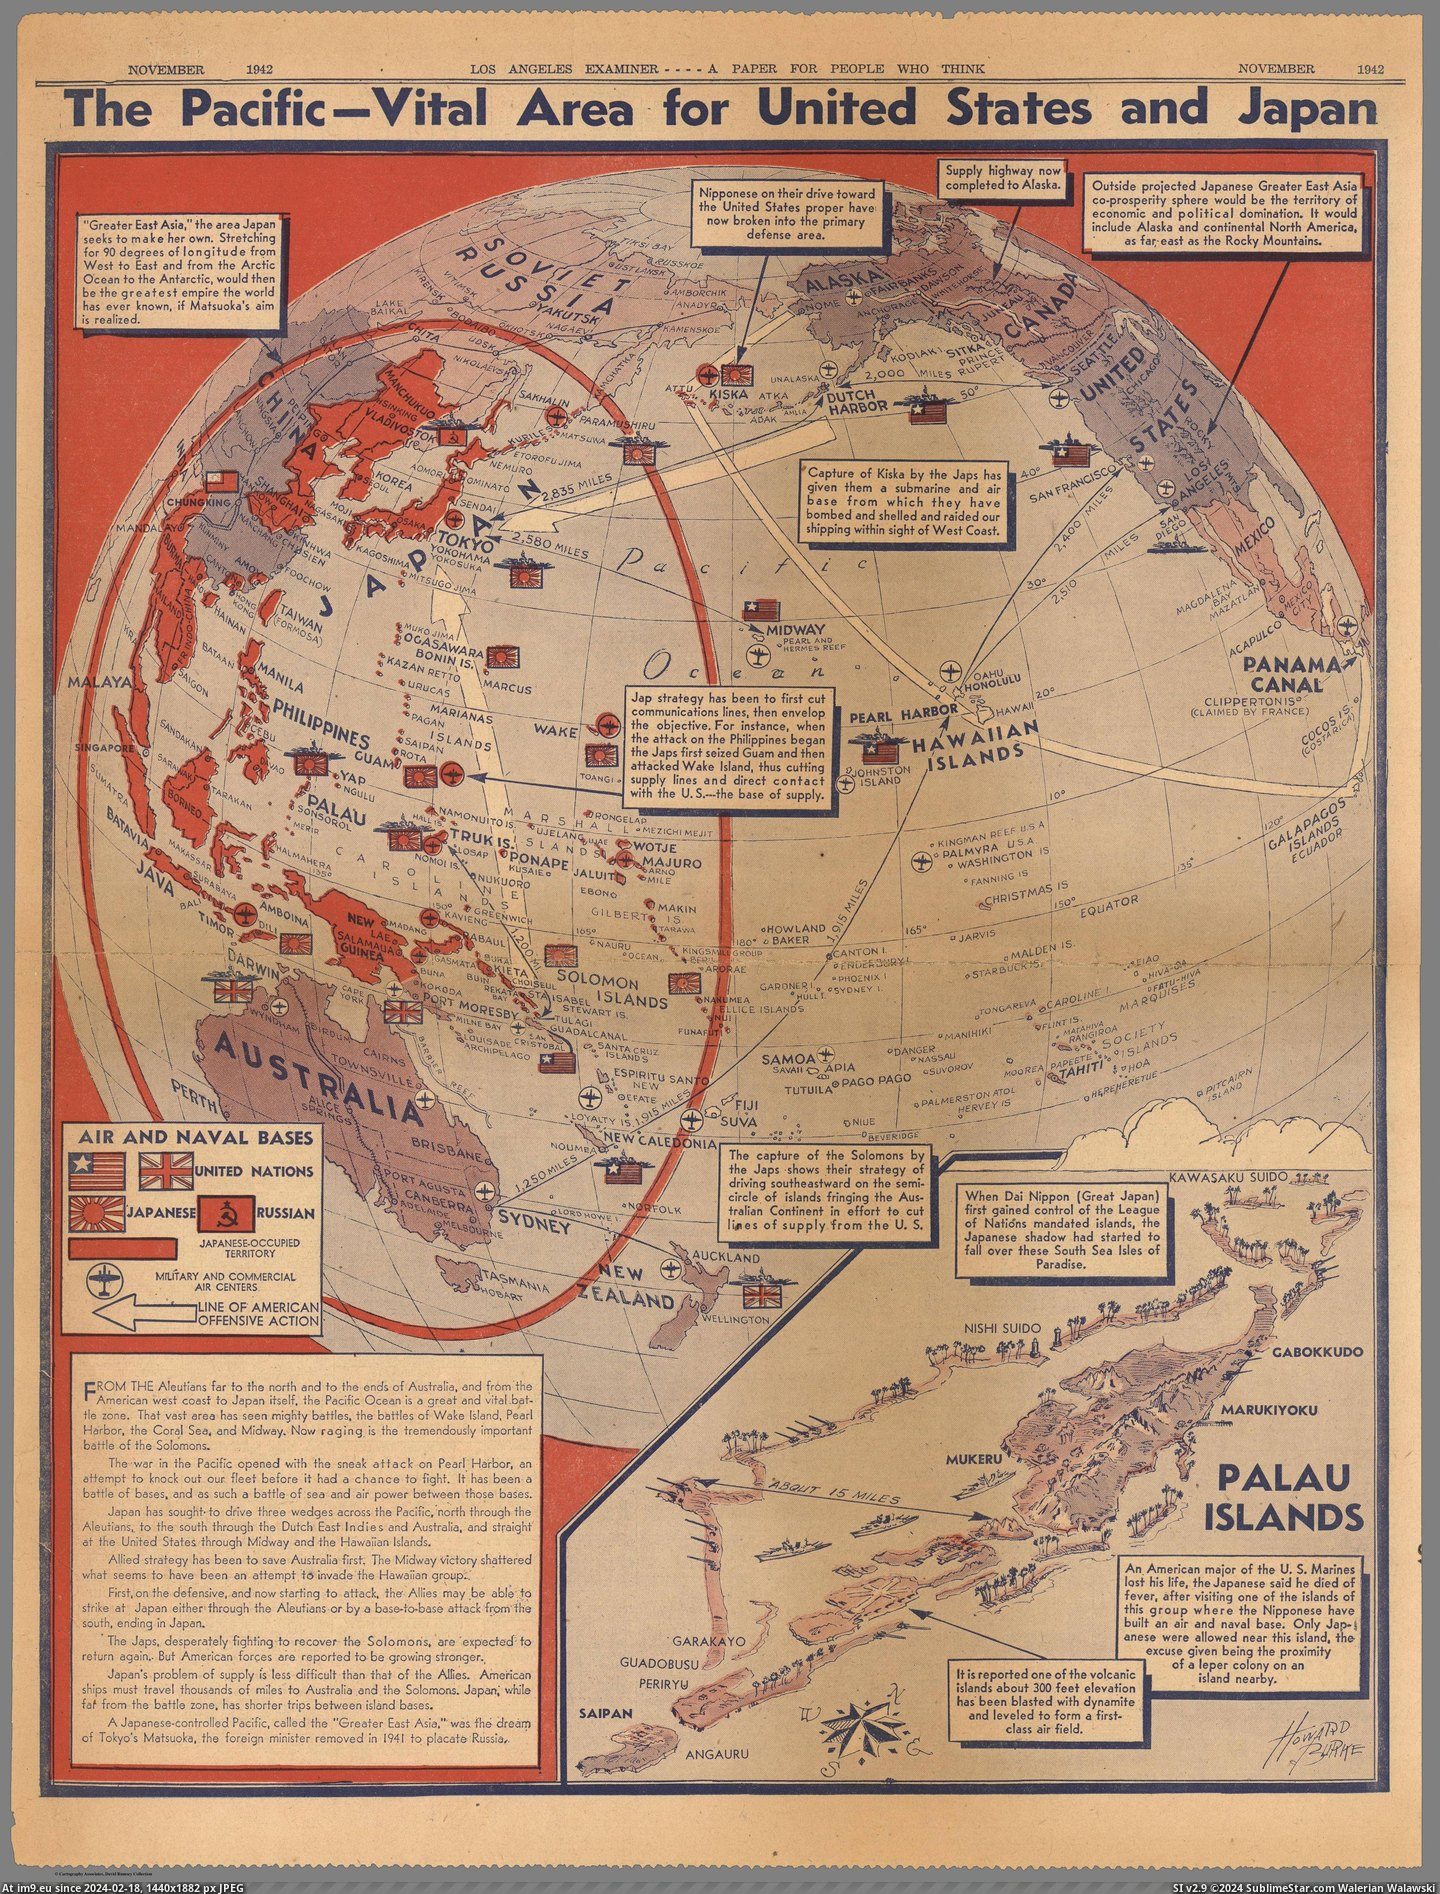 #States #Japan #United #Los #Published #Vital #Examiner #Area #Angeles #Pacific #November [Mapporn] 'The Pacific - Vital Area for United States and Japan.' Published in the Los Angeles Examiner in November 1942, made b Pic. (Image of album My r/MAPS favs))